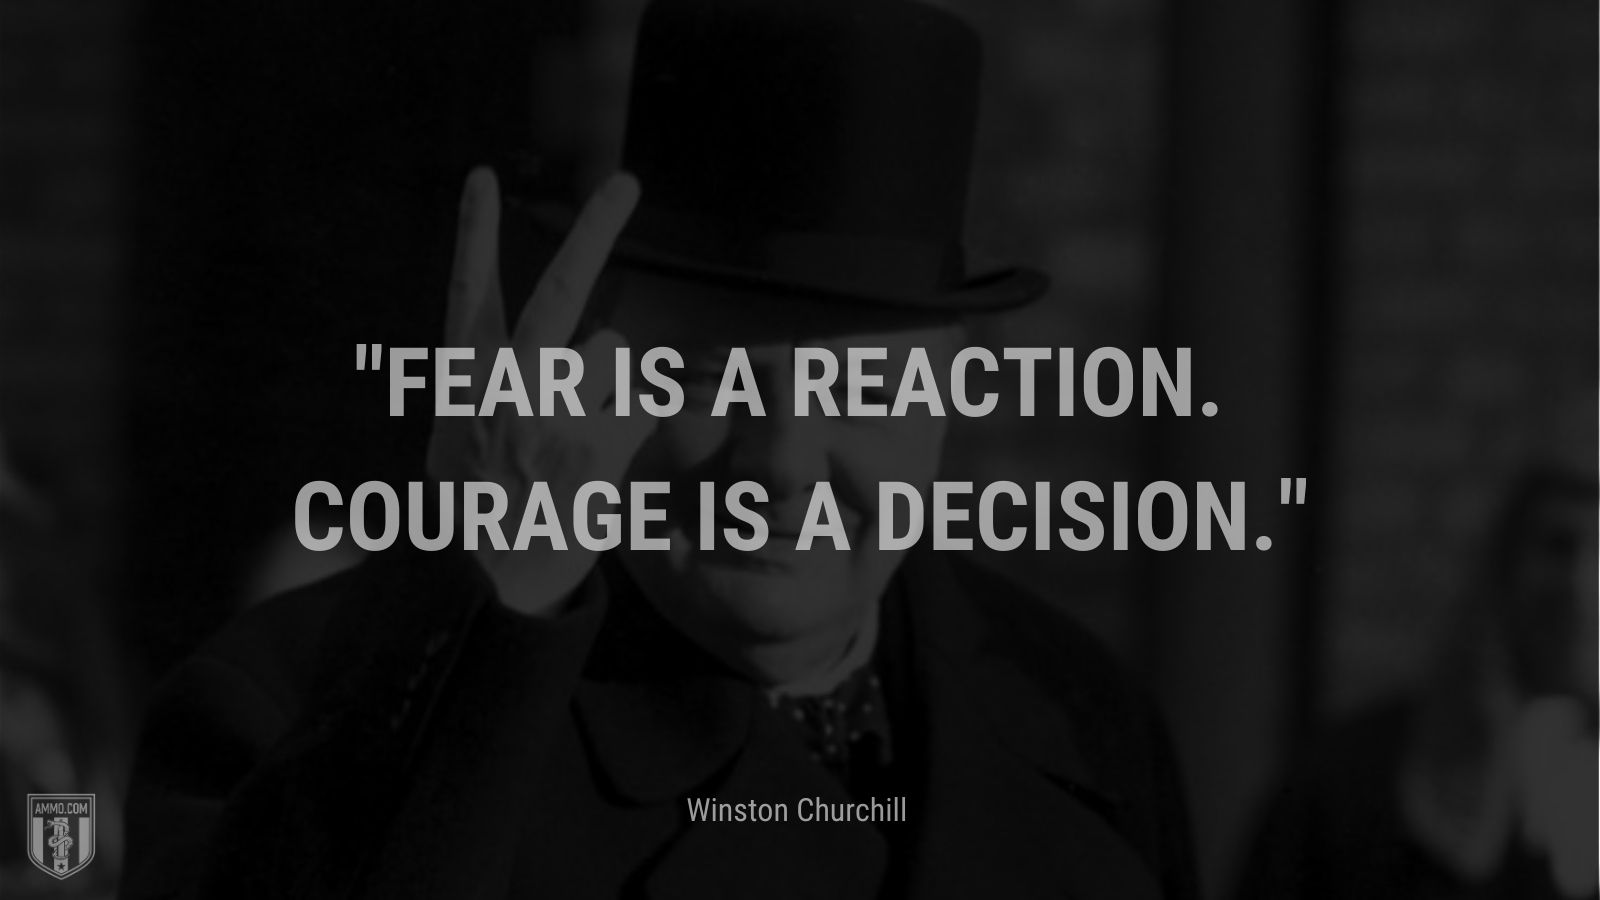 Fear is a reaction. Courage is a decision.